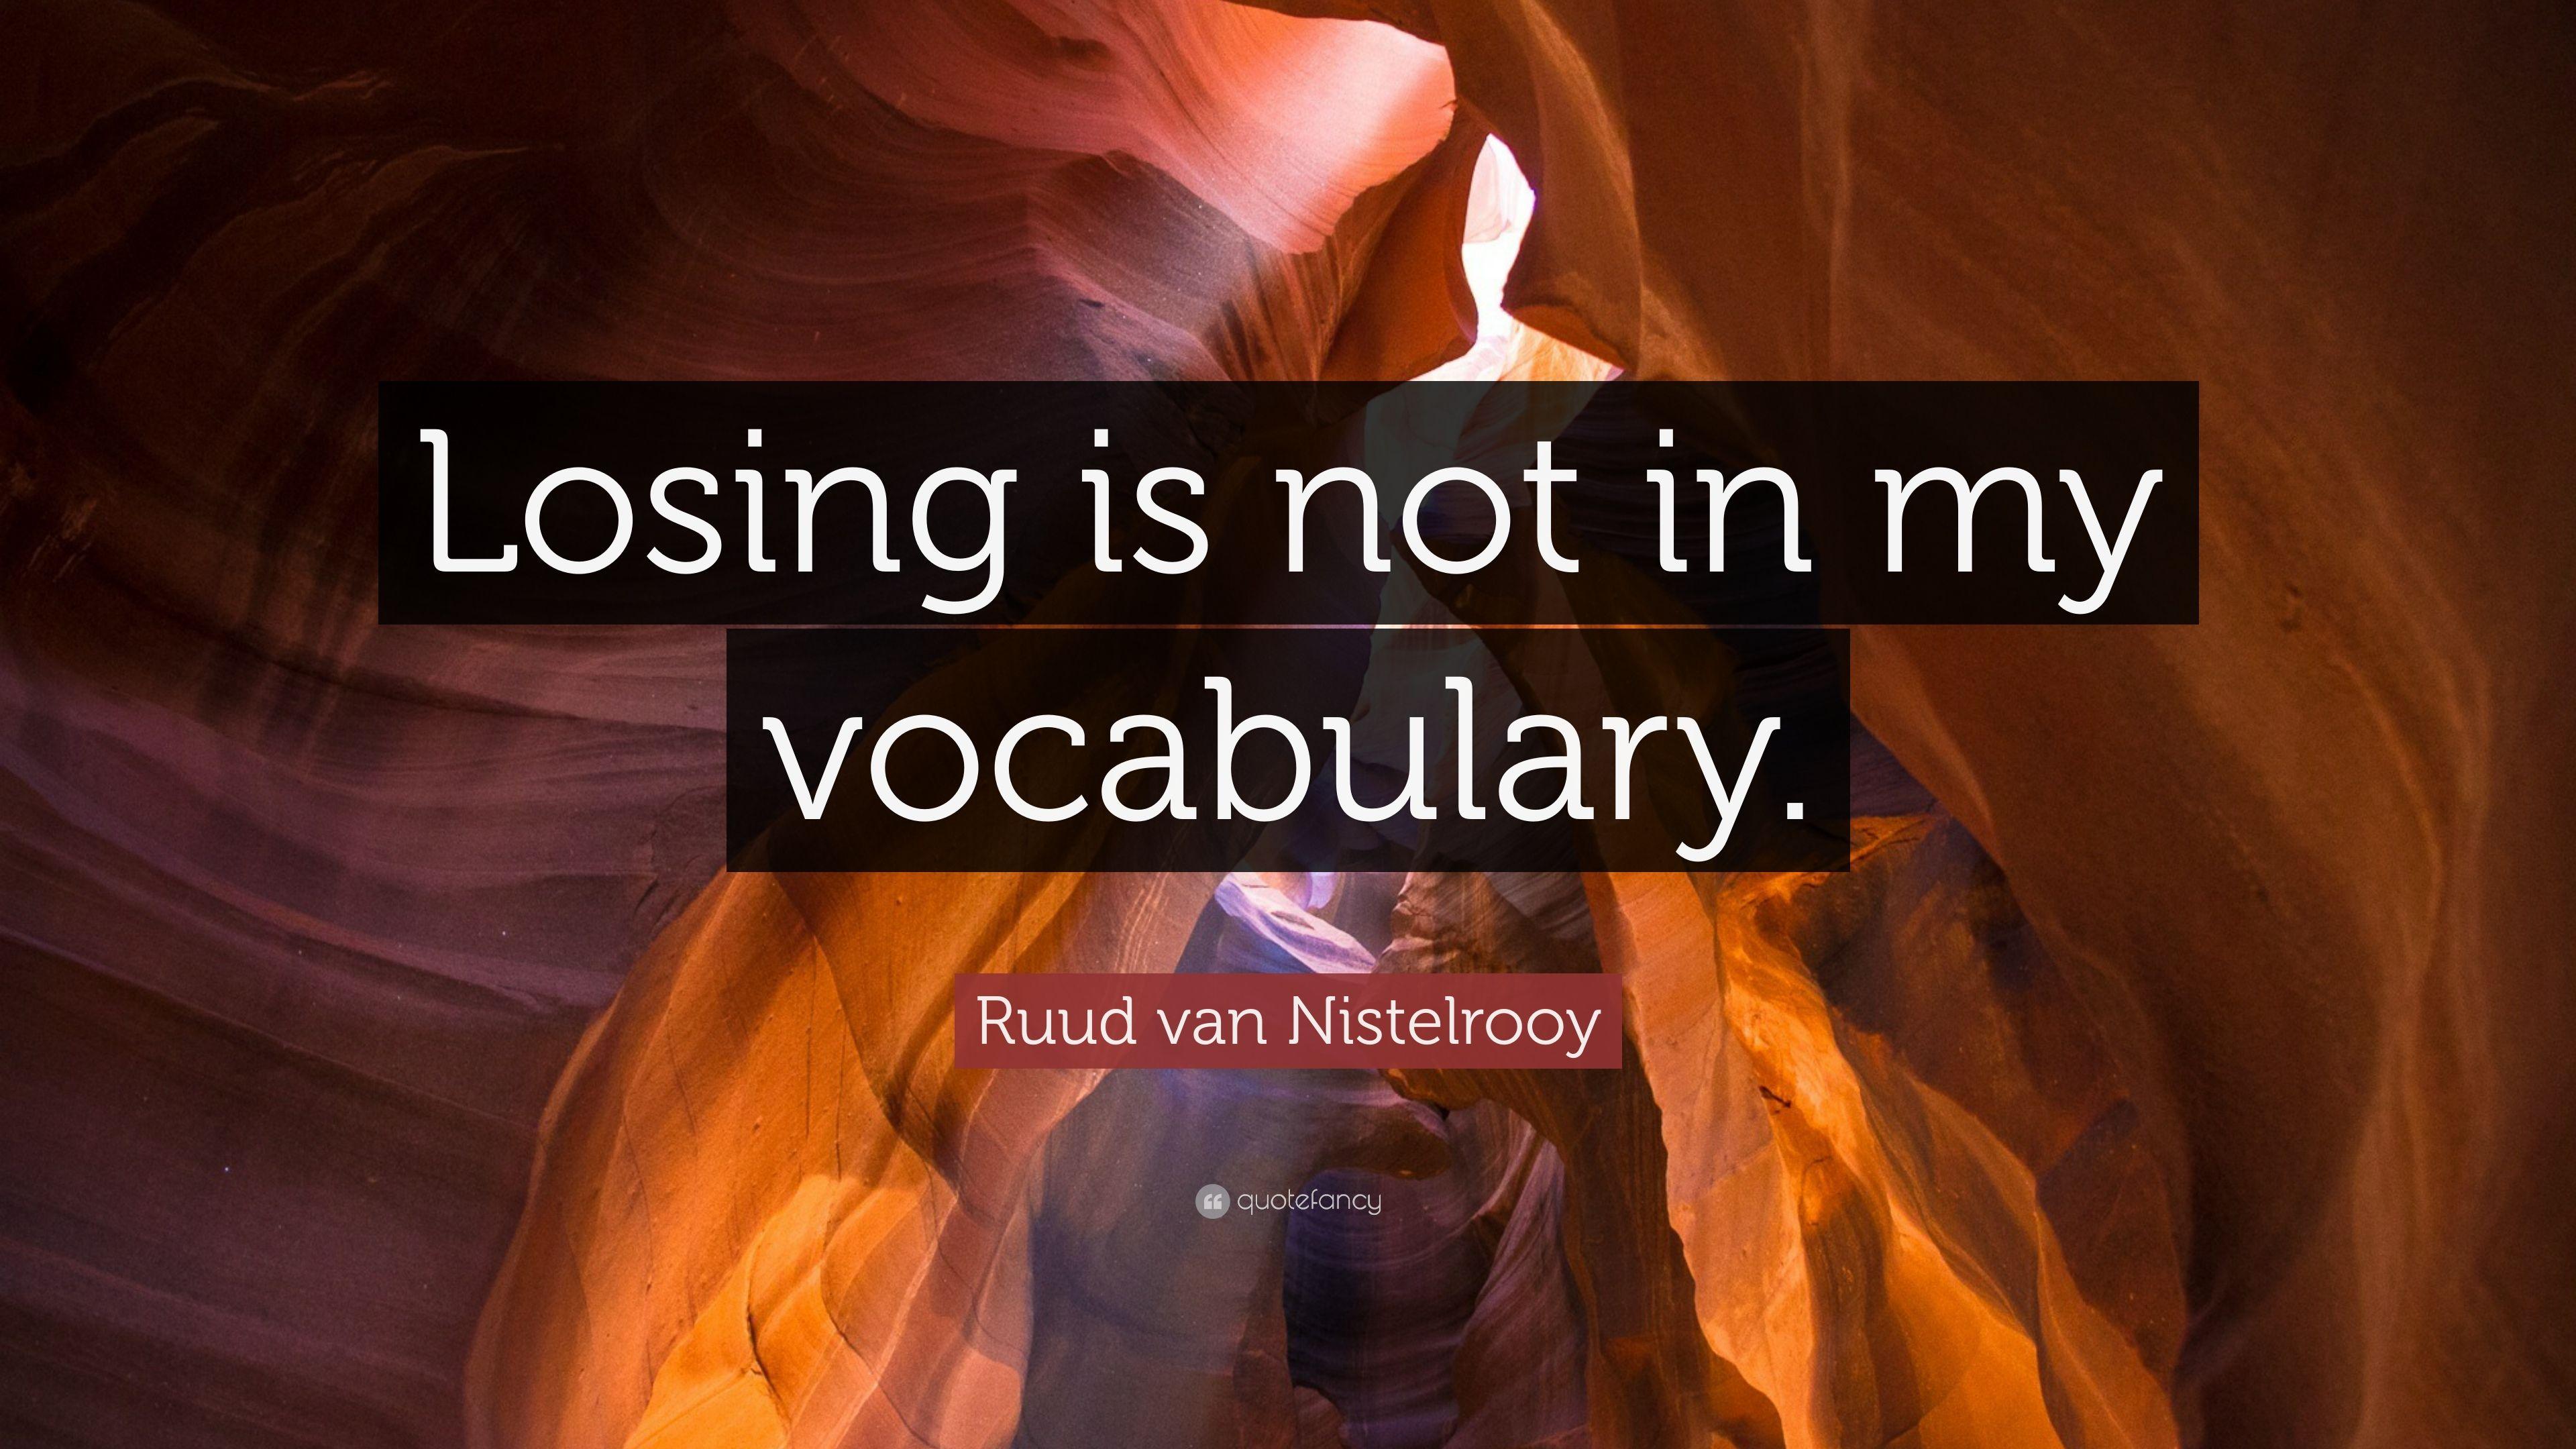 Ruud van Nistelrooy Quote: “Losing is not in my vocabulary.” 7